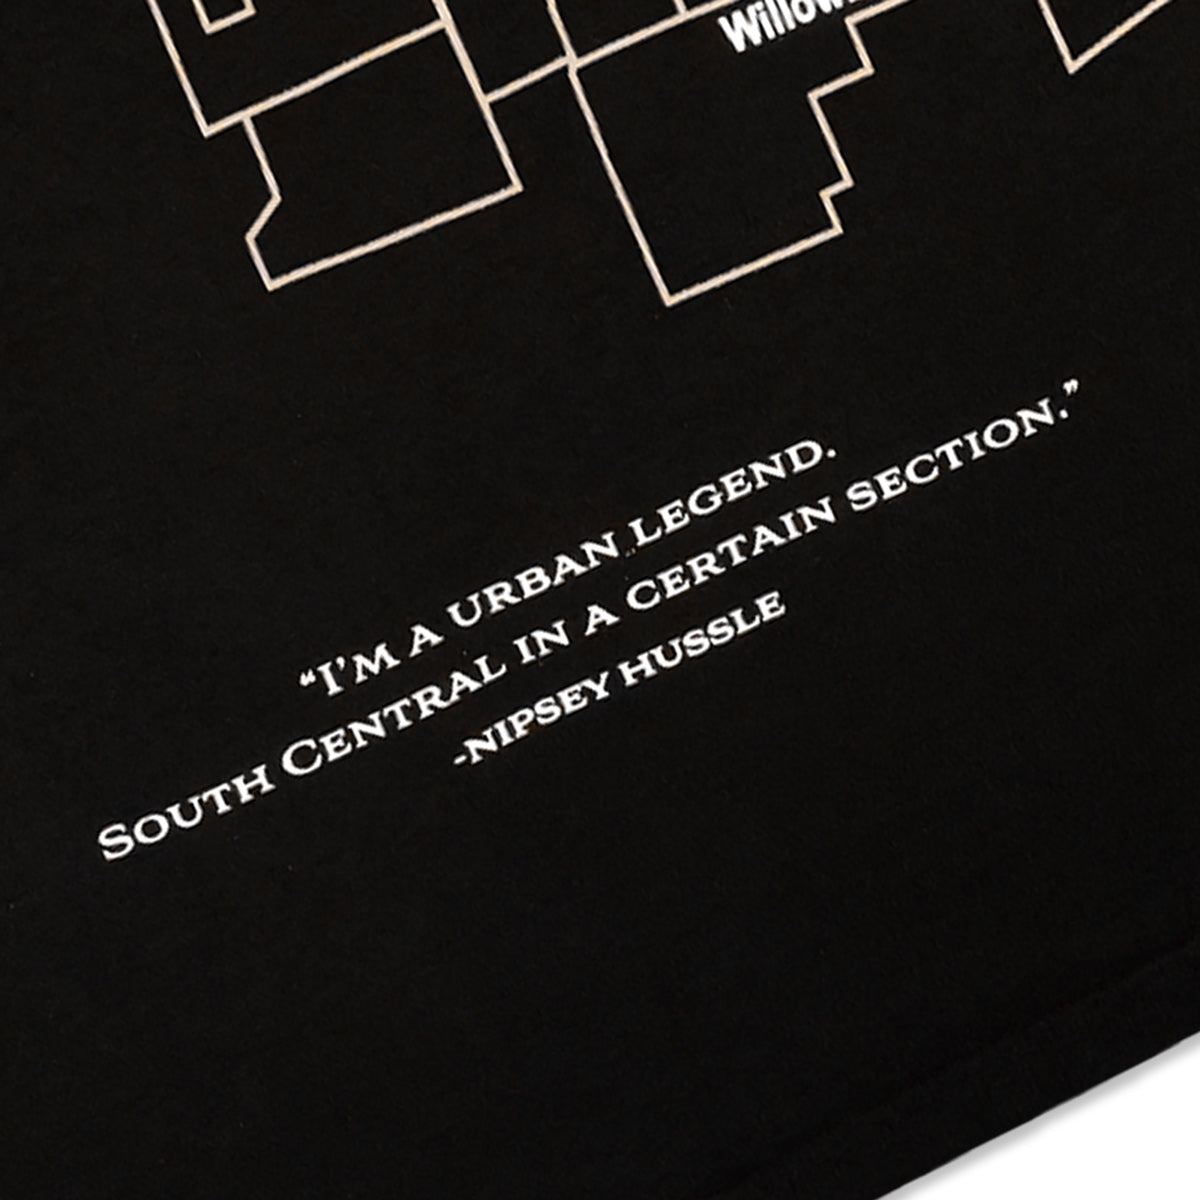 South Central State of Mind T-Shirt - Black/White - Quote Detail